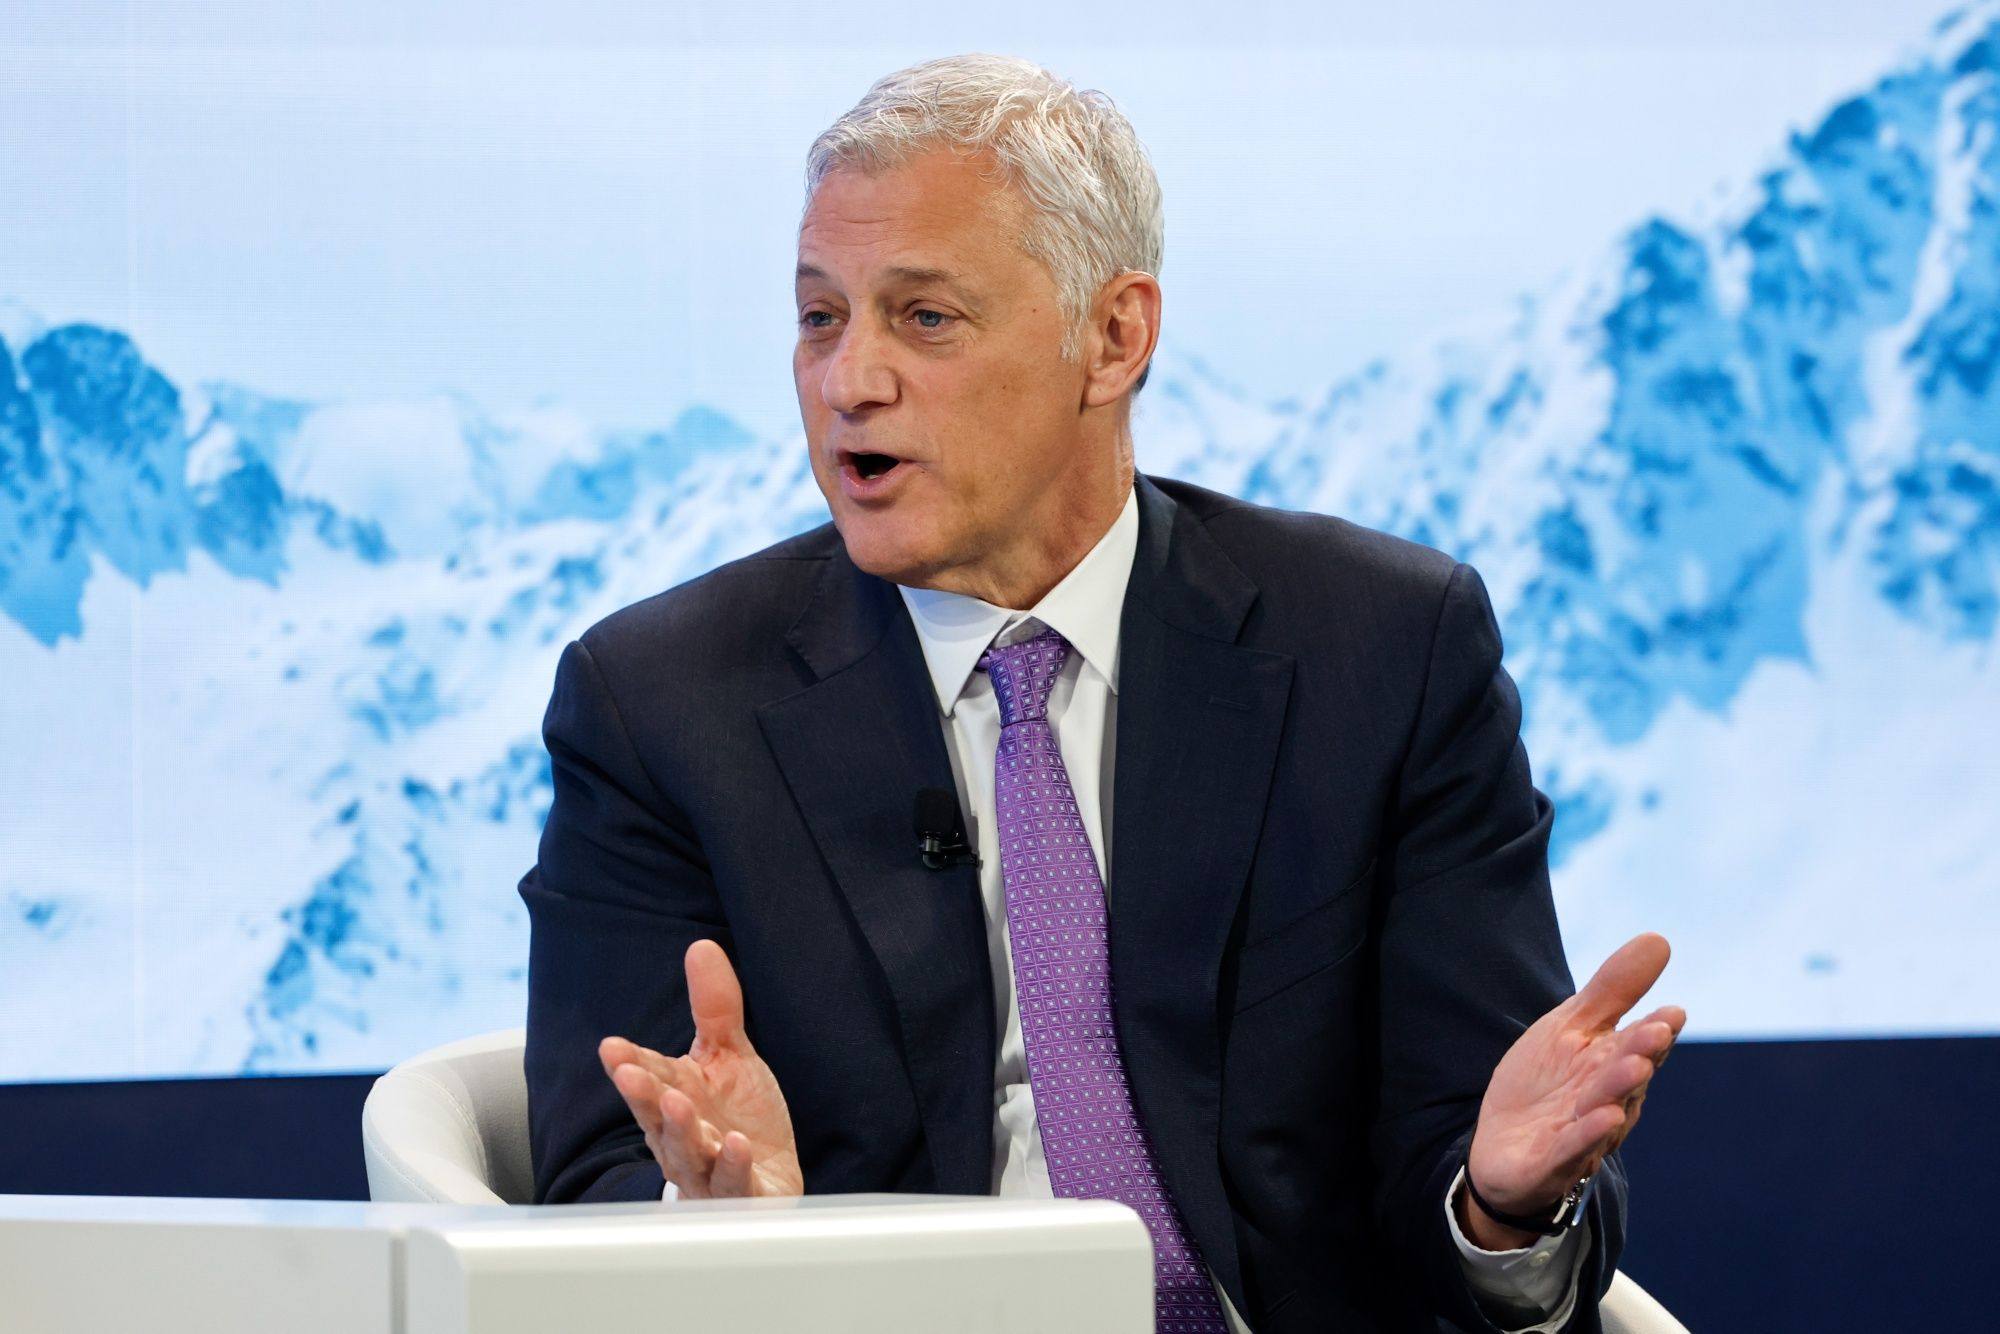 Bill Winters, chief executive officer of Standard Chartered, speaks during a panel at the World Economic Forum in Davos, Switzerland, in January. Photo: Bloomberg